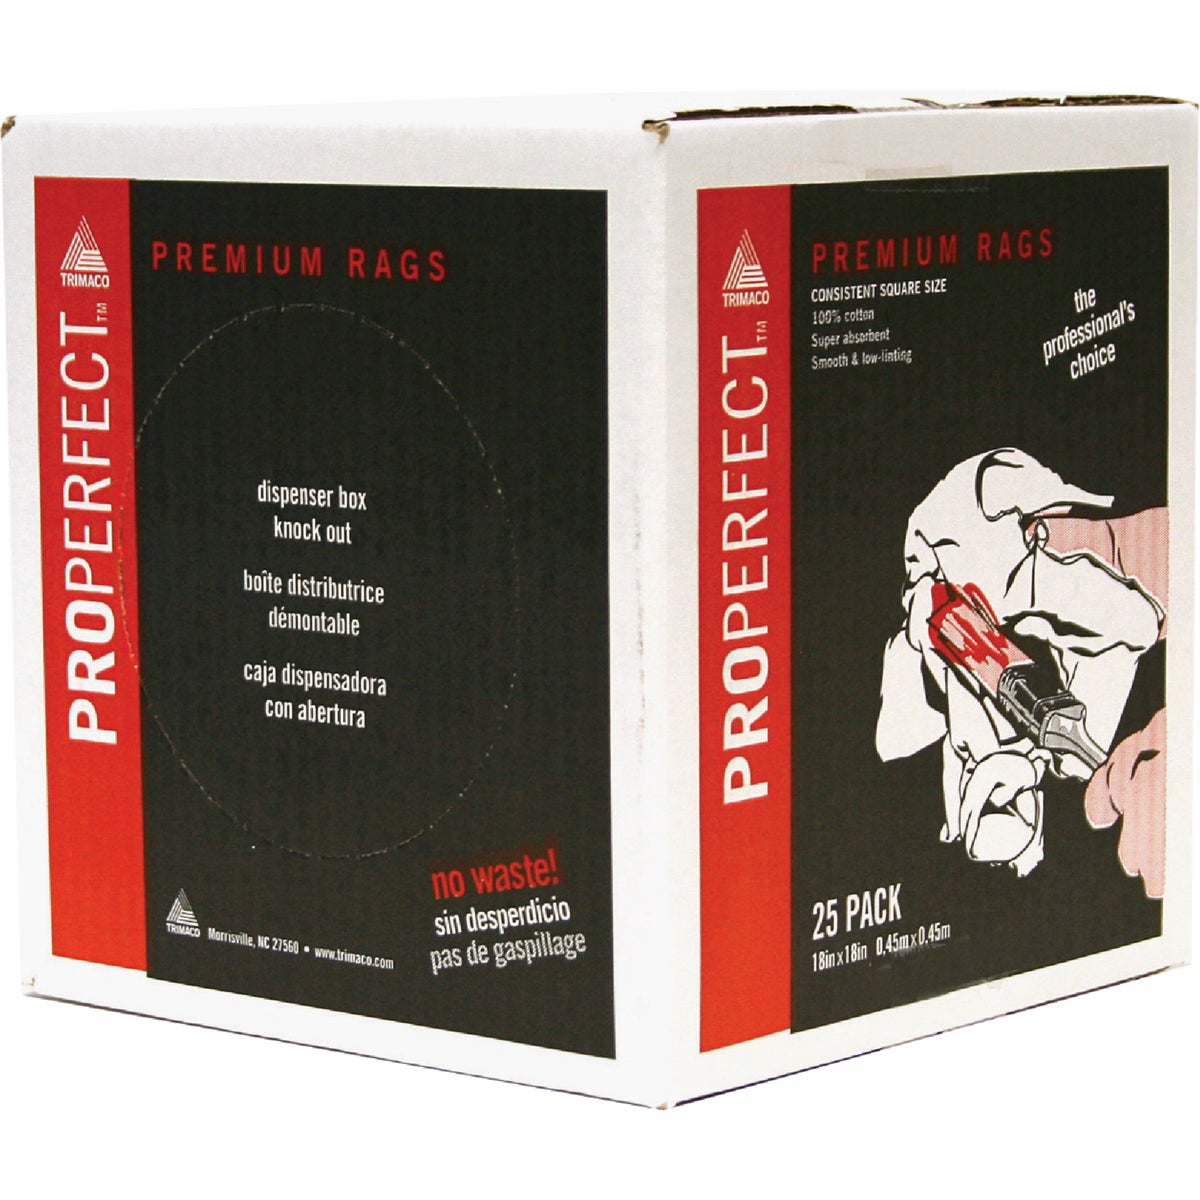 Item 770590, Trimaco's ProPerfect Premium Rags are designed to be the perfect size for 